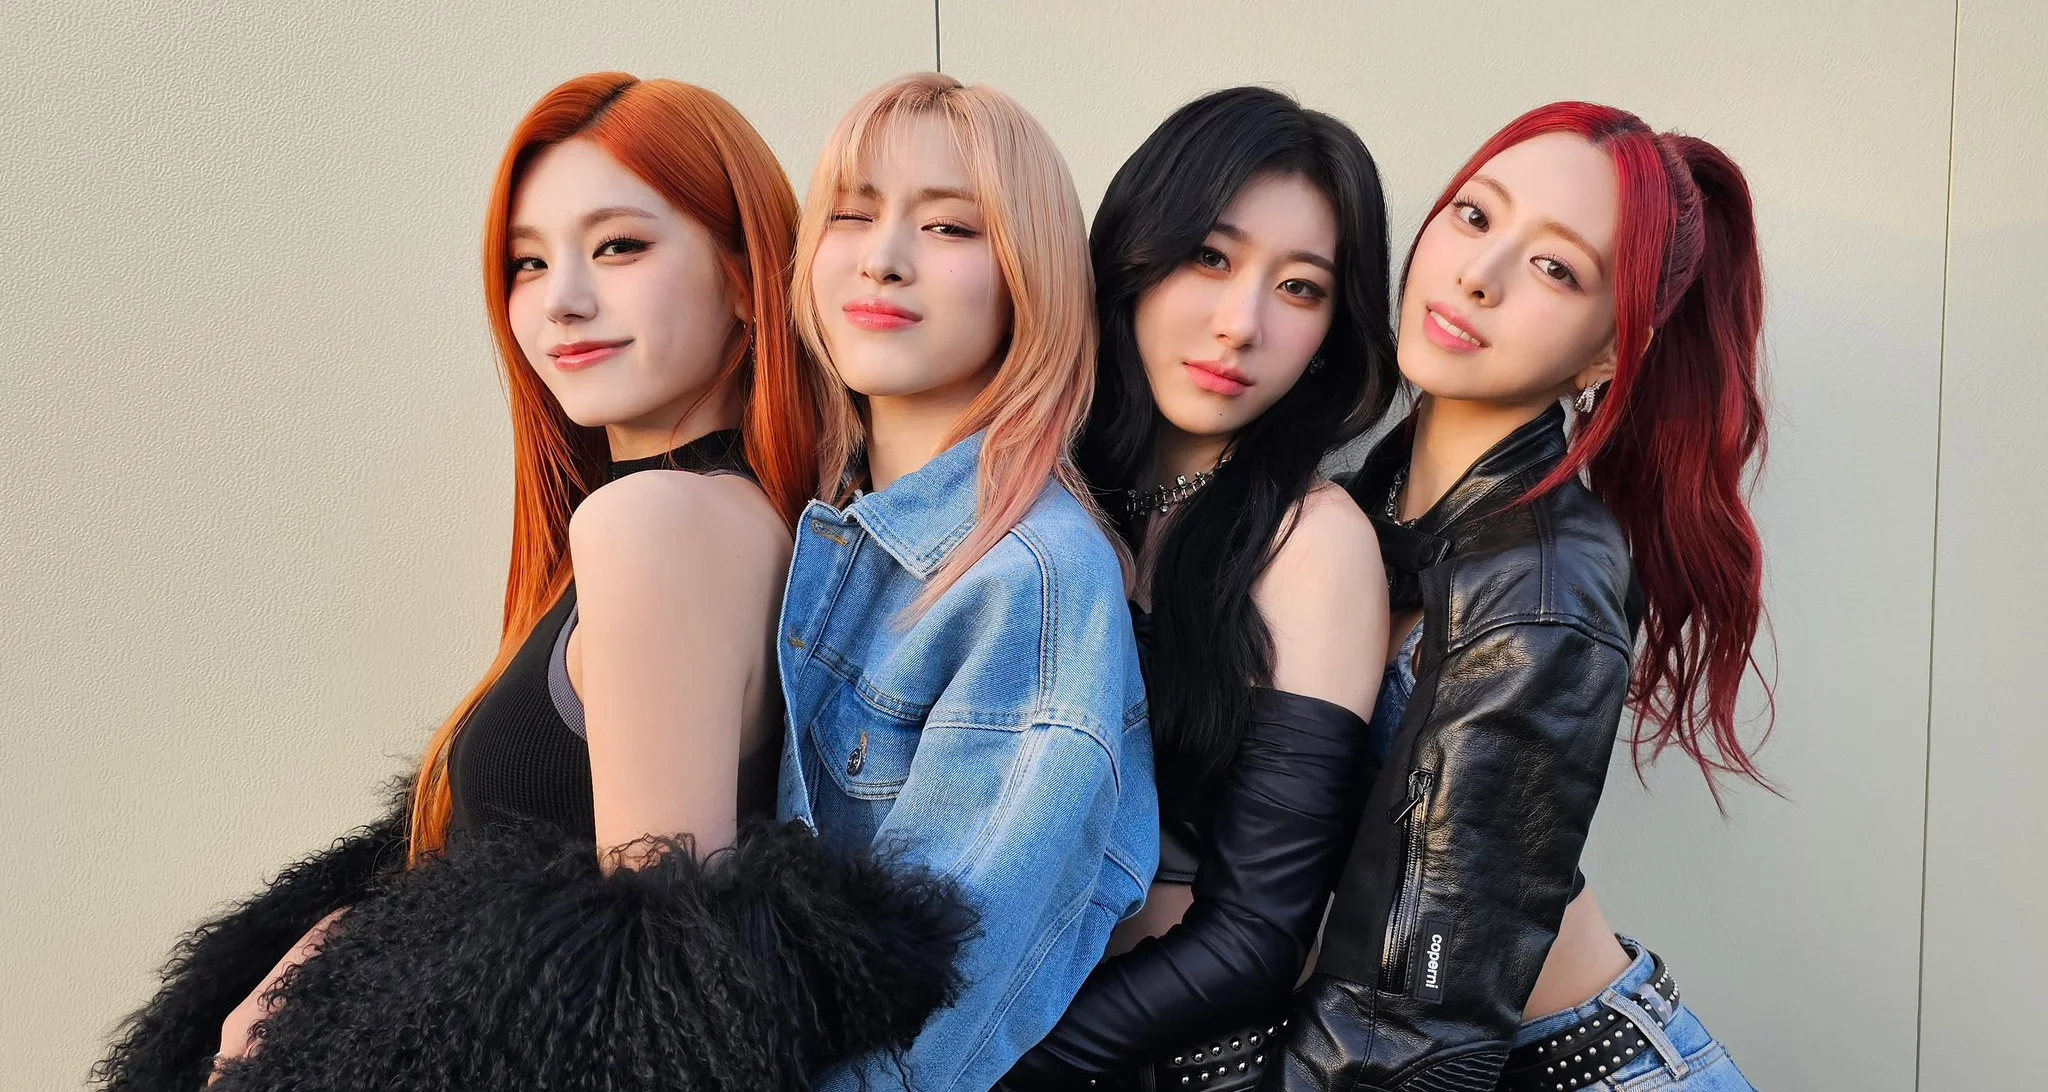 ITZY is showing who they were 'BORN TO BE': Members on new album